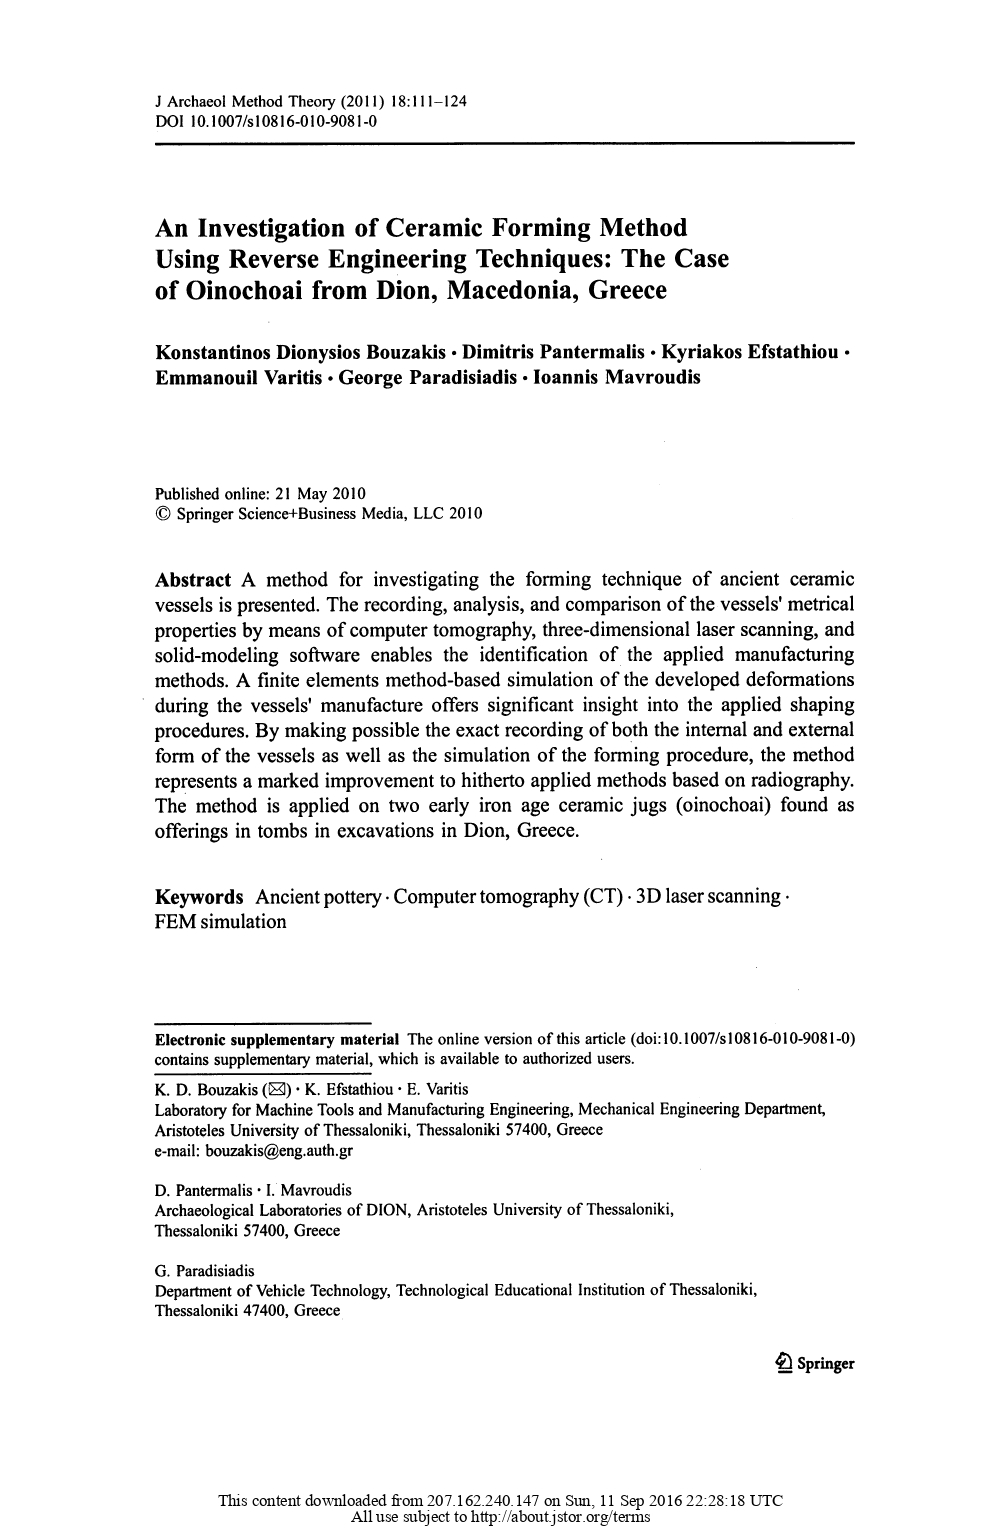 An Investigation of Ceramic Forming Method Using Reverse Engineering Techniques The Case of Oinochoai from Dion, Macedonia, Greece_page-0001.jpg